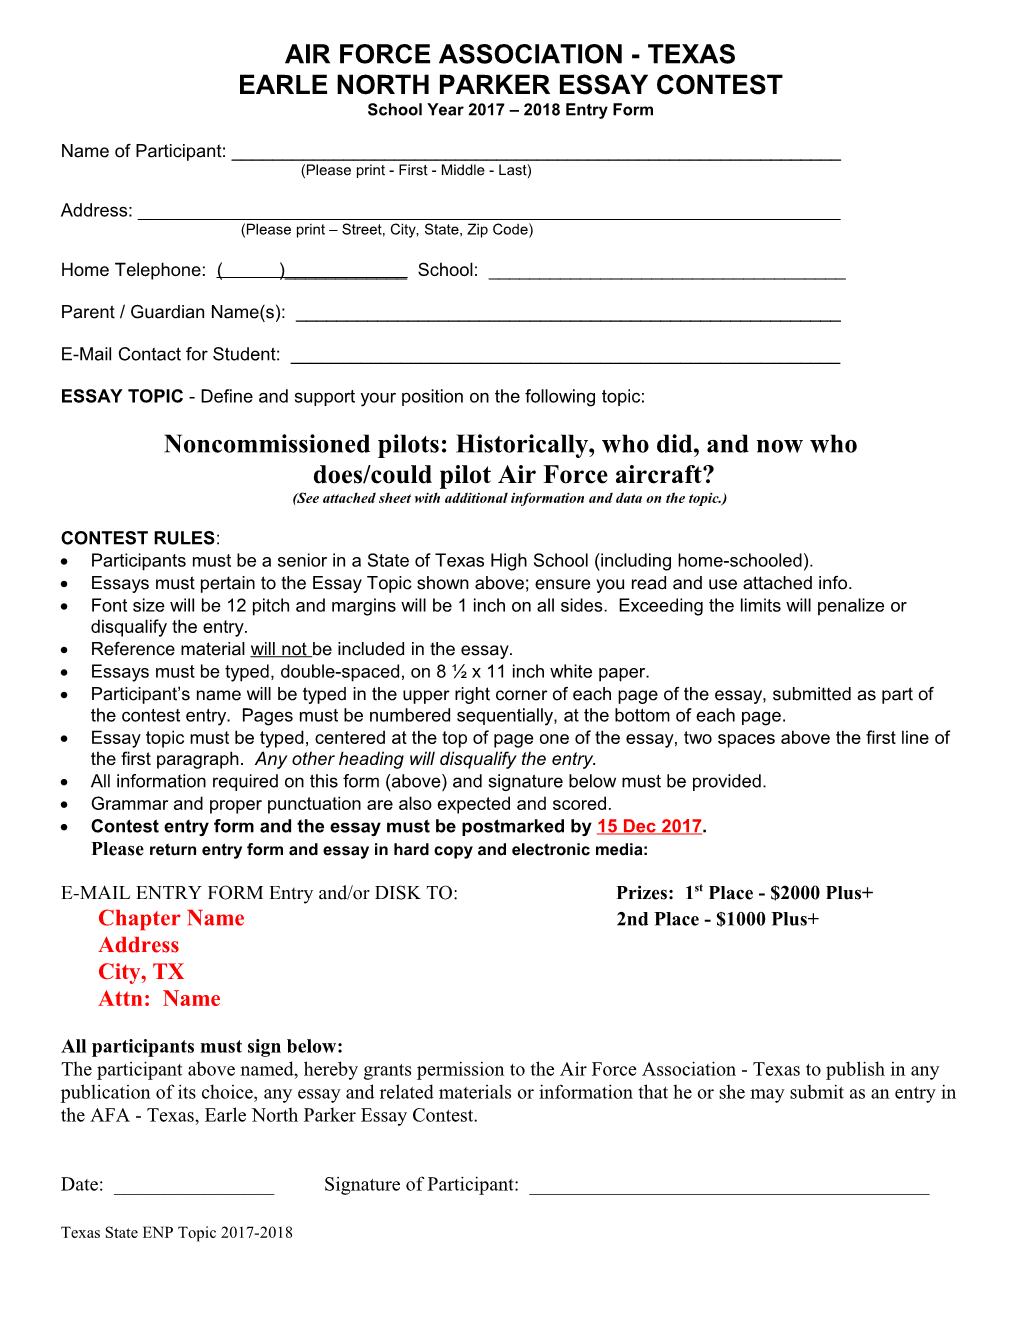 Earle North Parker Essay Contest